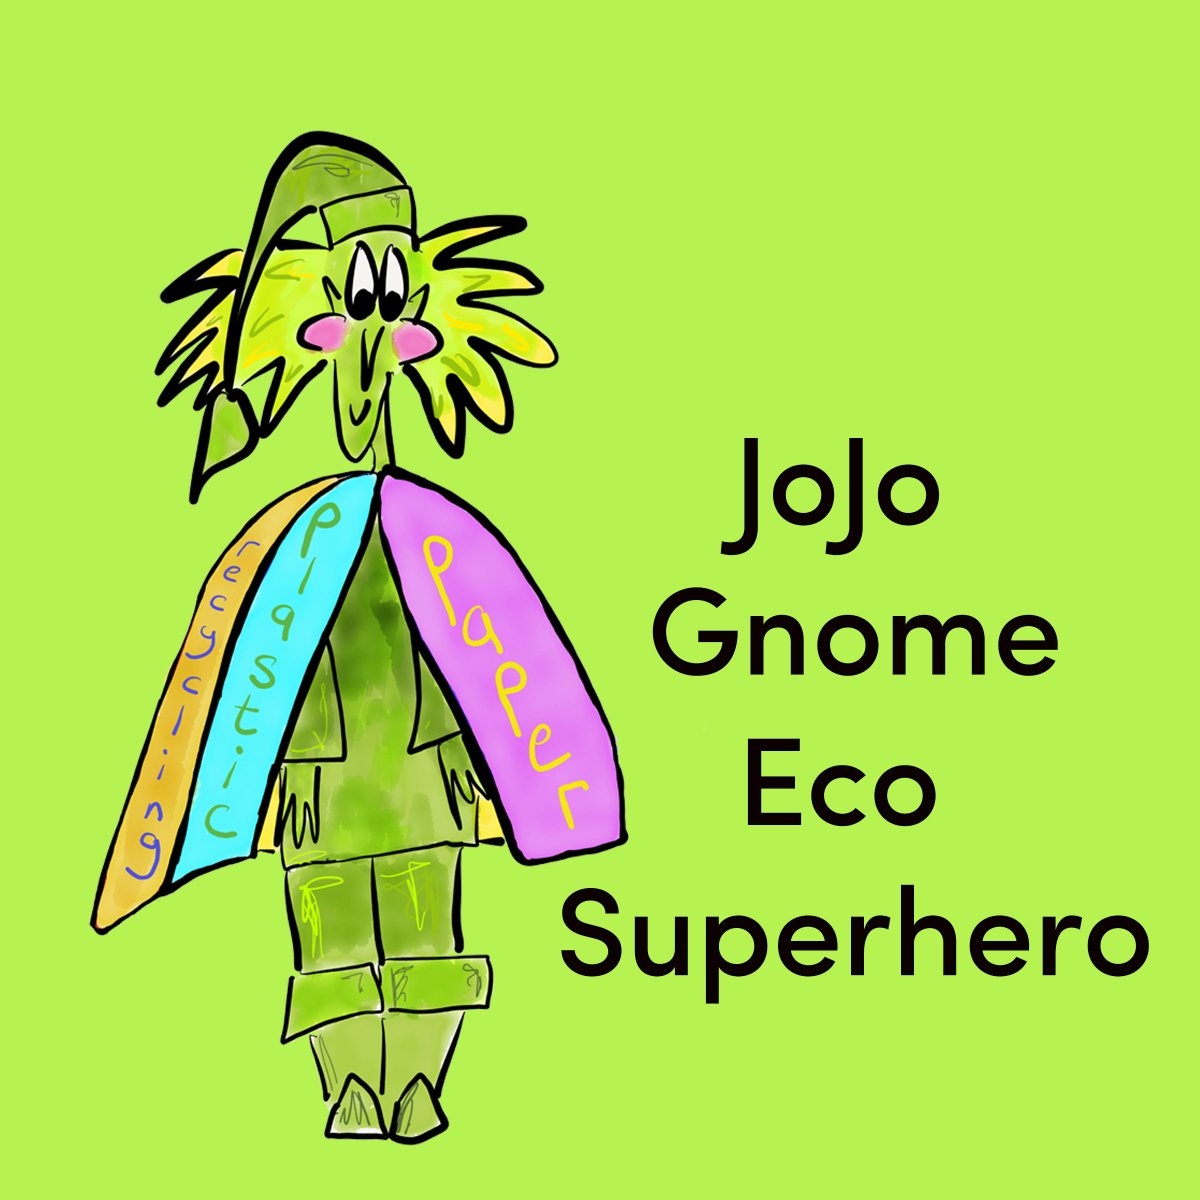 Looking forward to coming to @ASP180 tomorrow for some eco story fun at the JoJo Gnome Eco Story Workshop.